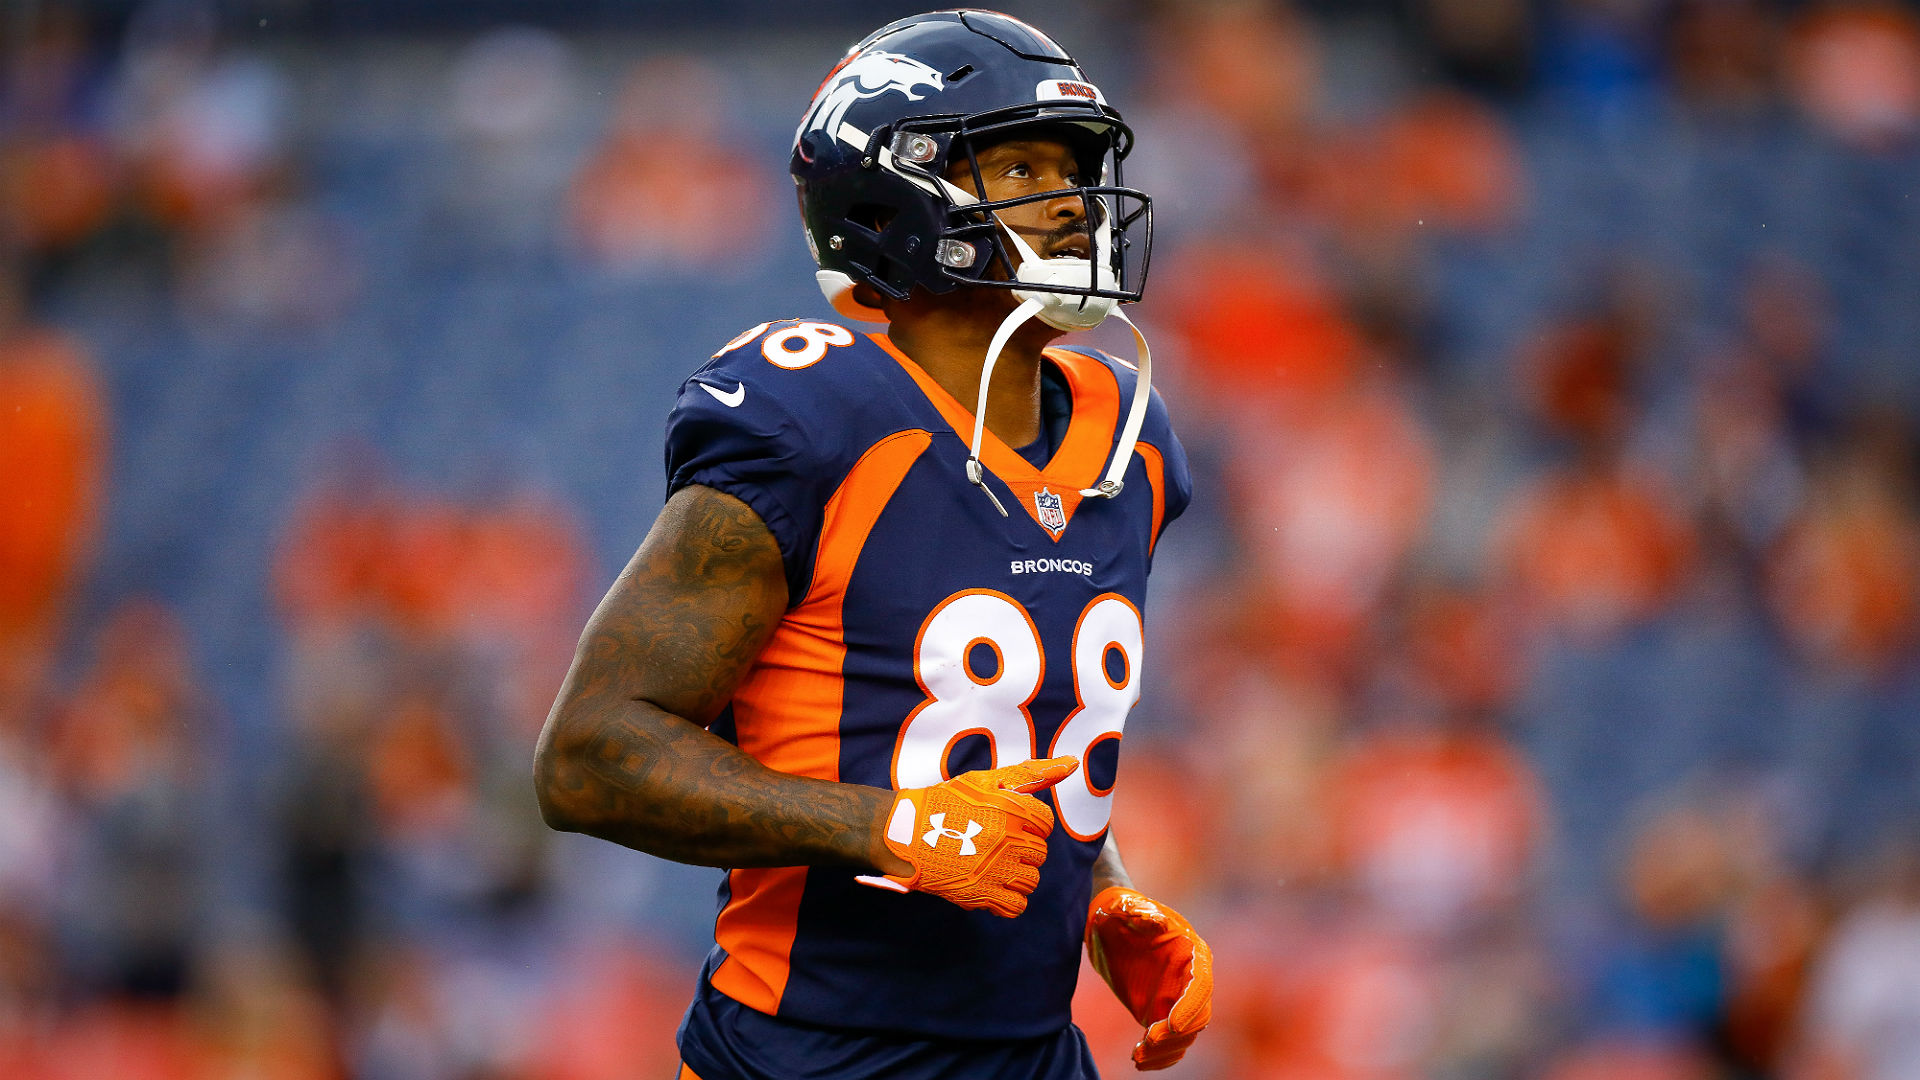 Demaryius Thomas had suggested he wanted to stay in Denver, but the Broncos have traded him to the Houston Texans.